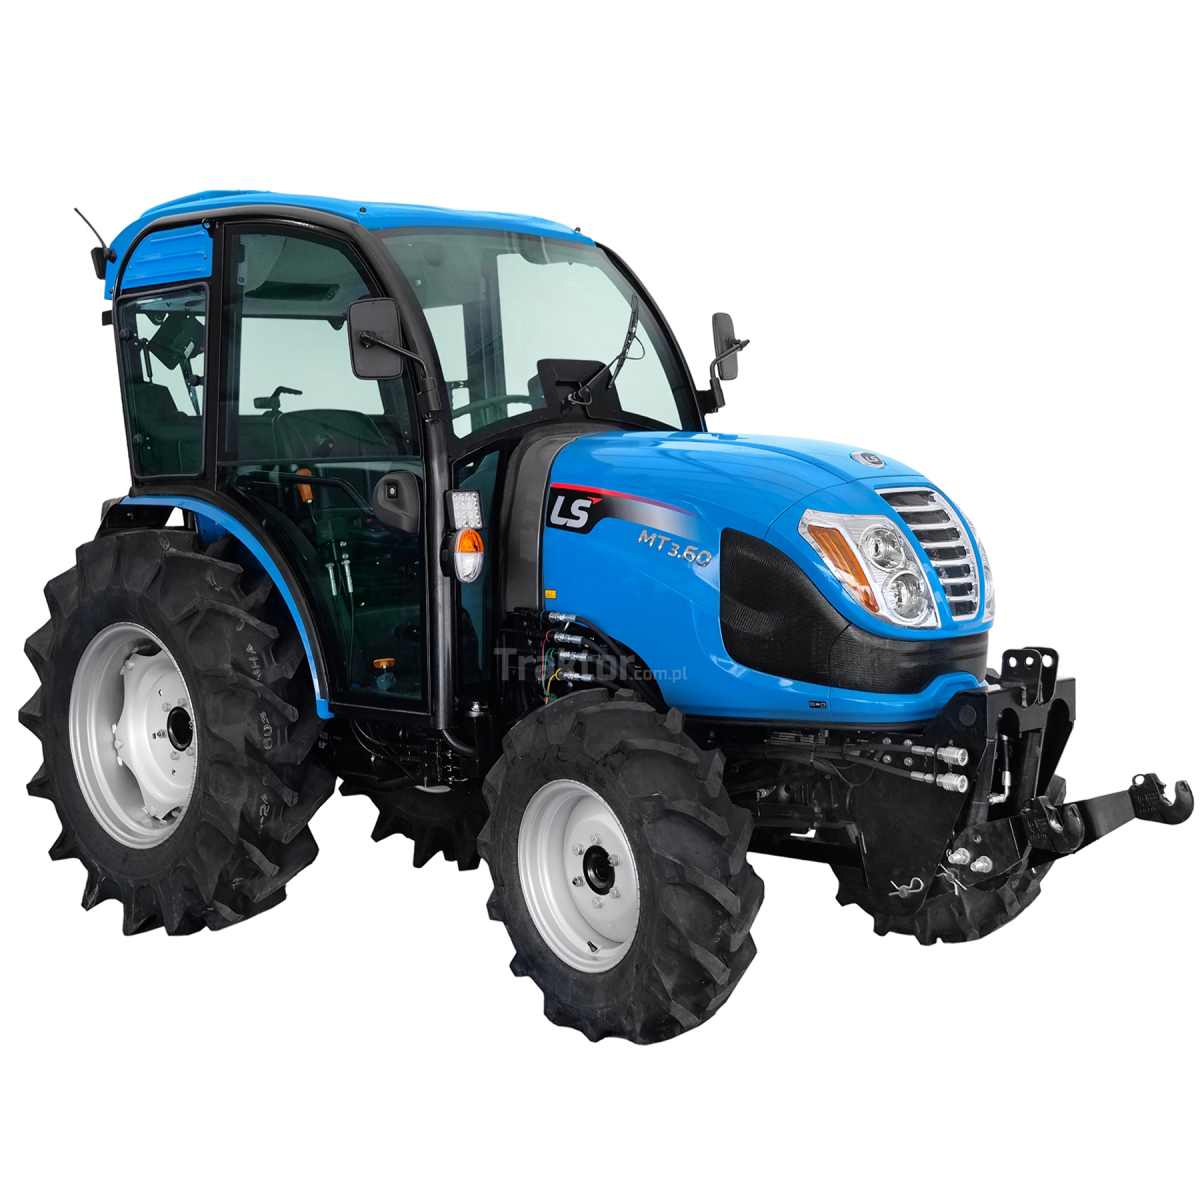 LS Tractor MT3.60 MEC 4x4 - 57 HP / CAB with air conditioning + front linkage Premium 4FARMER